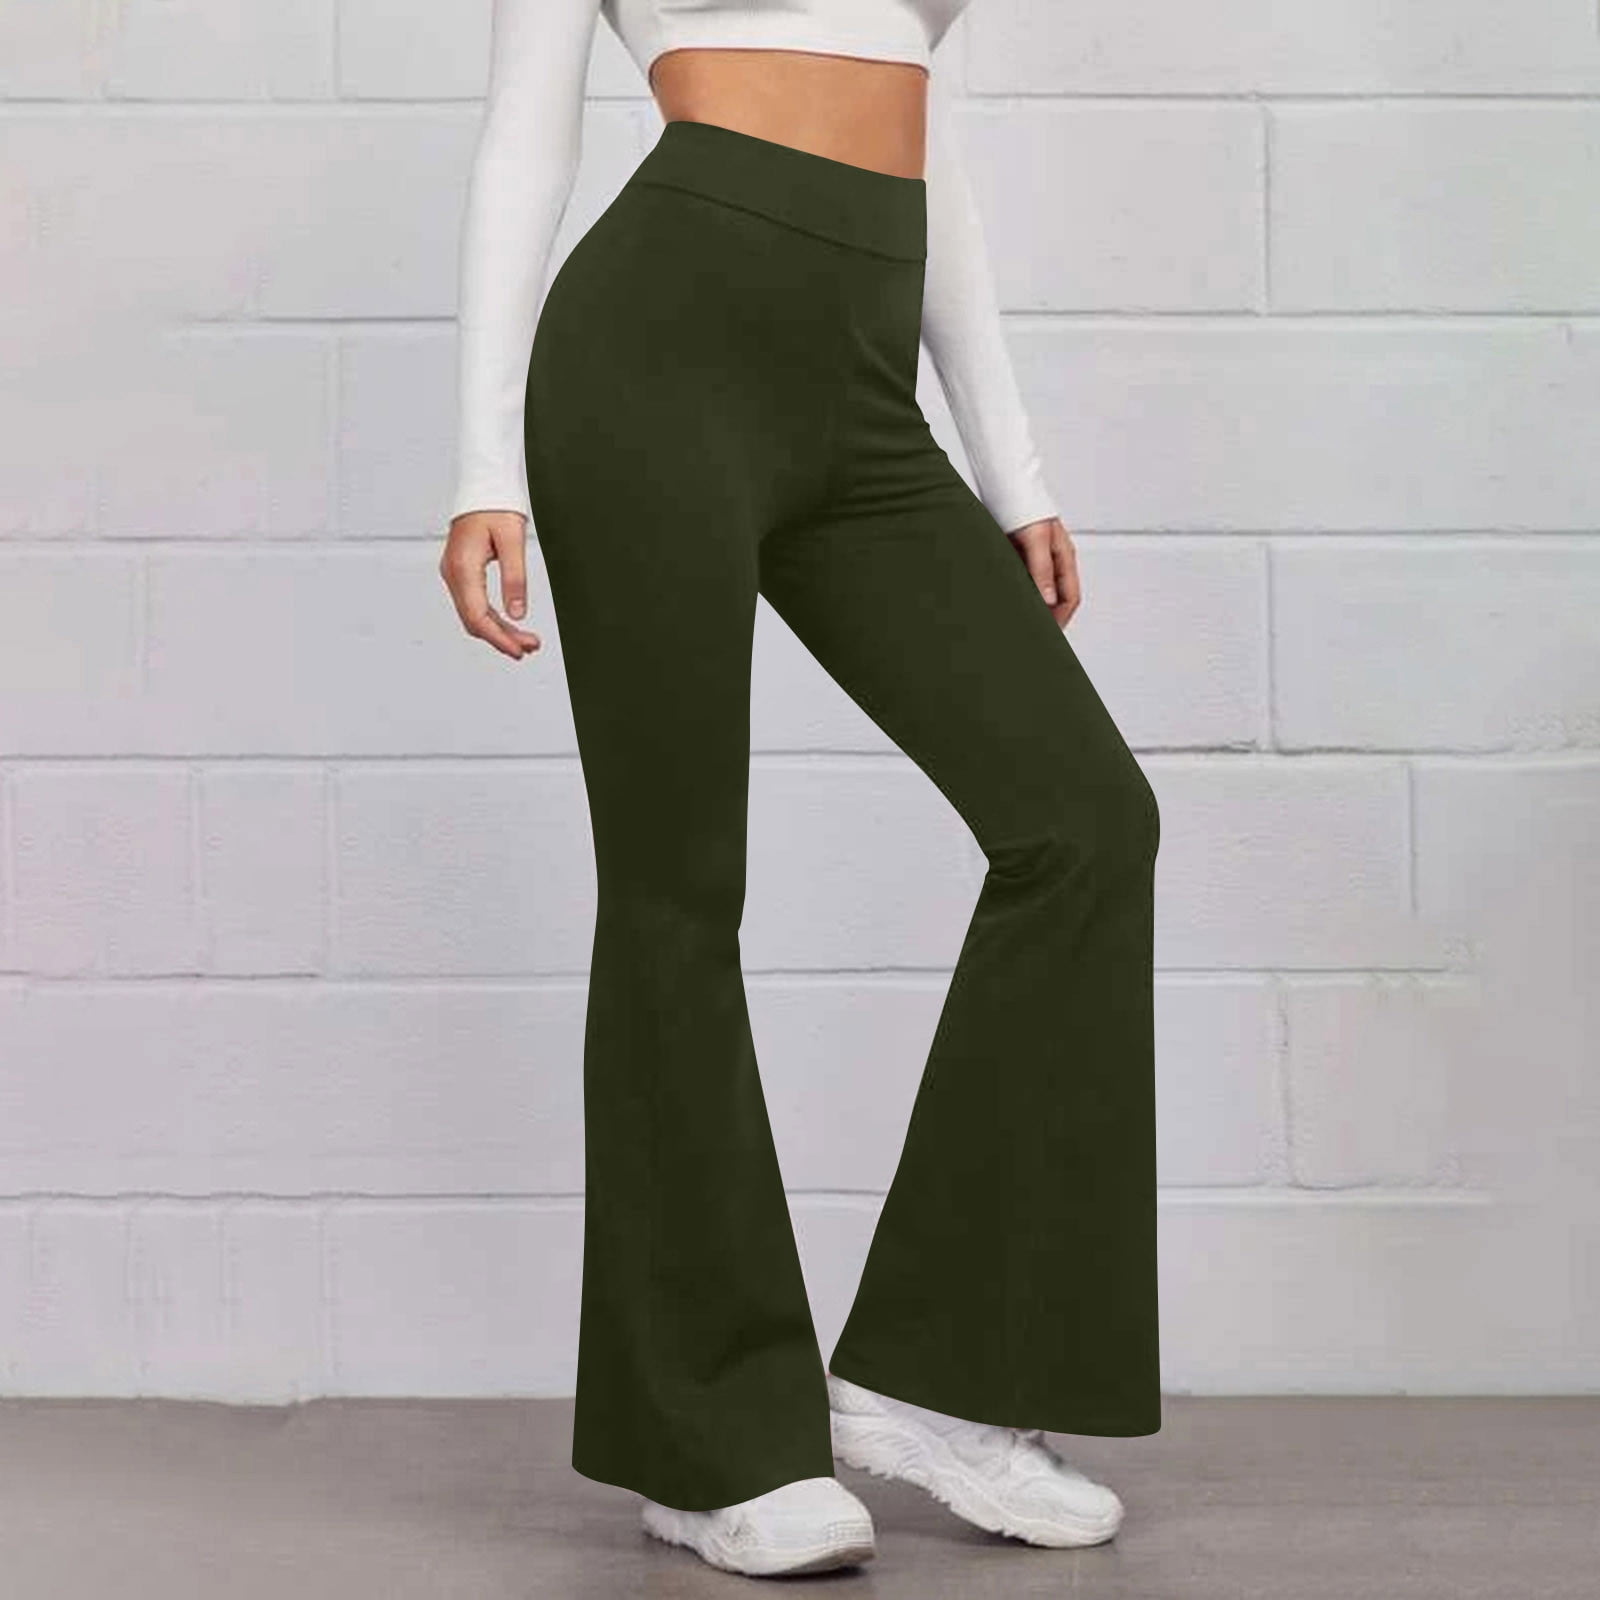 Jyeity Early 2000s Women'S Fashion, Slim High Elastic Waist Solid Color  Sports Yoga Flare Pants Plus Size Pants For Curvy Women Army Green Size  S(US:4) 